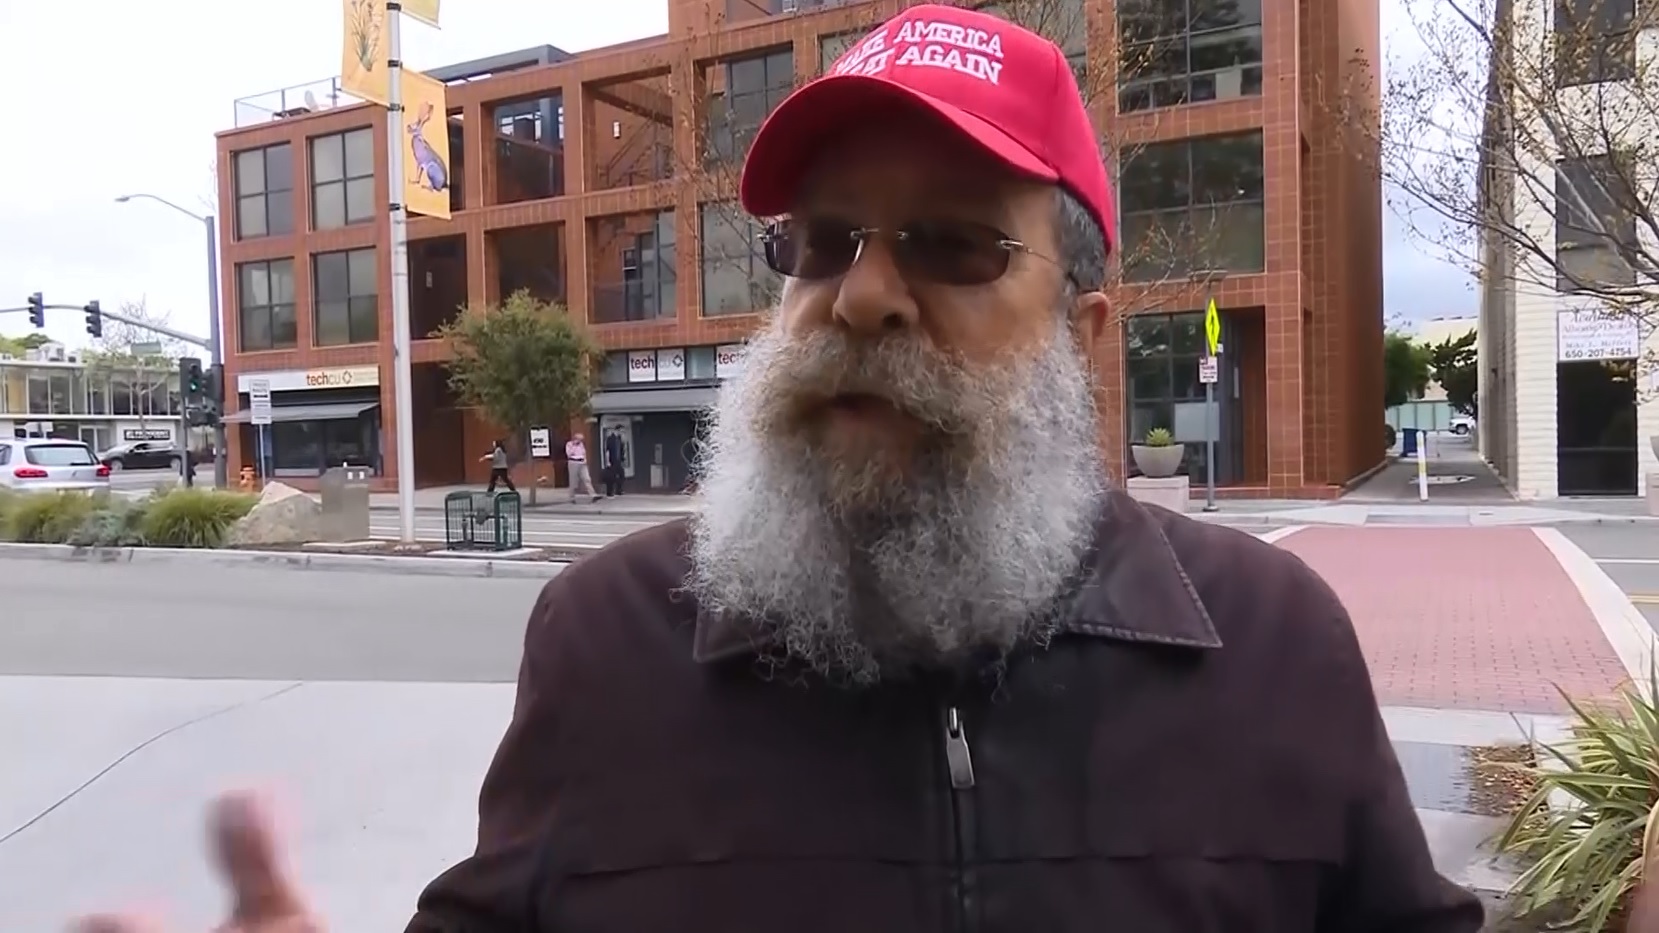 Victor F., a supporter of President Donald Trump, wears his "Make America Great Again" hat in Palo Alto following a confrontation at a local Starbucks. (CBS)